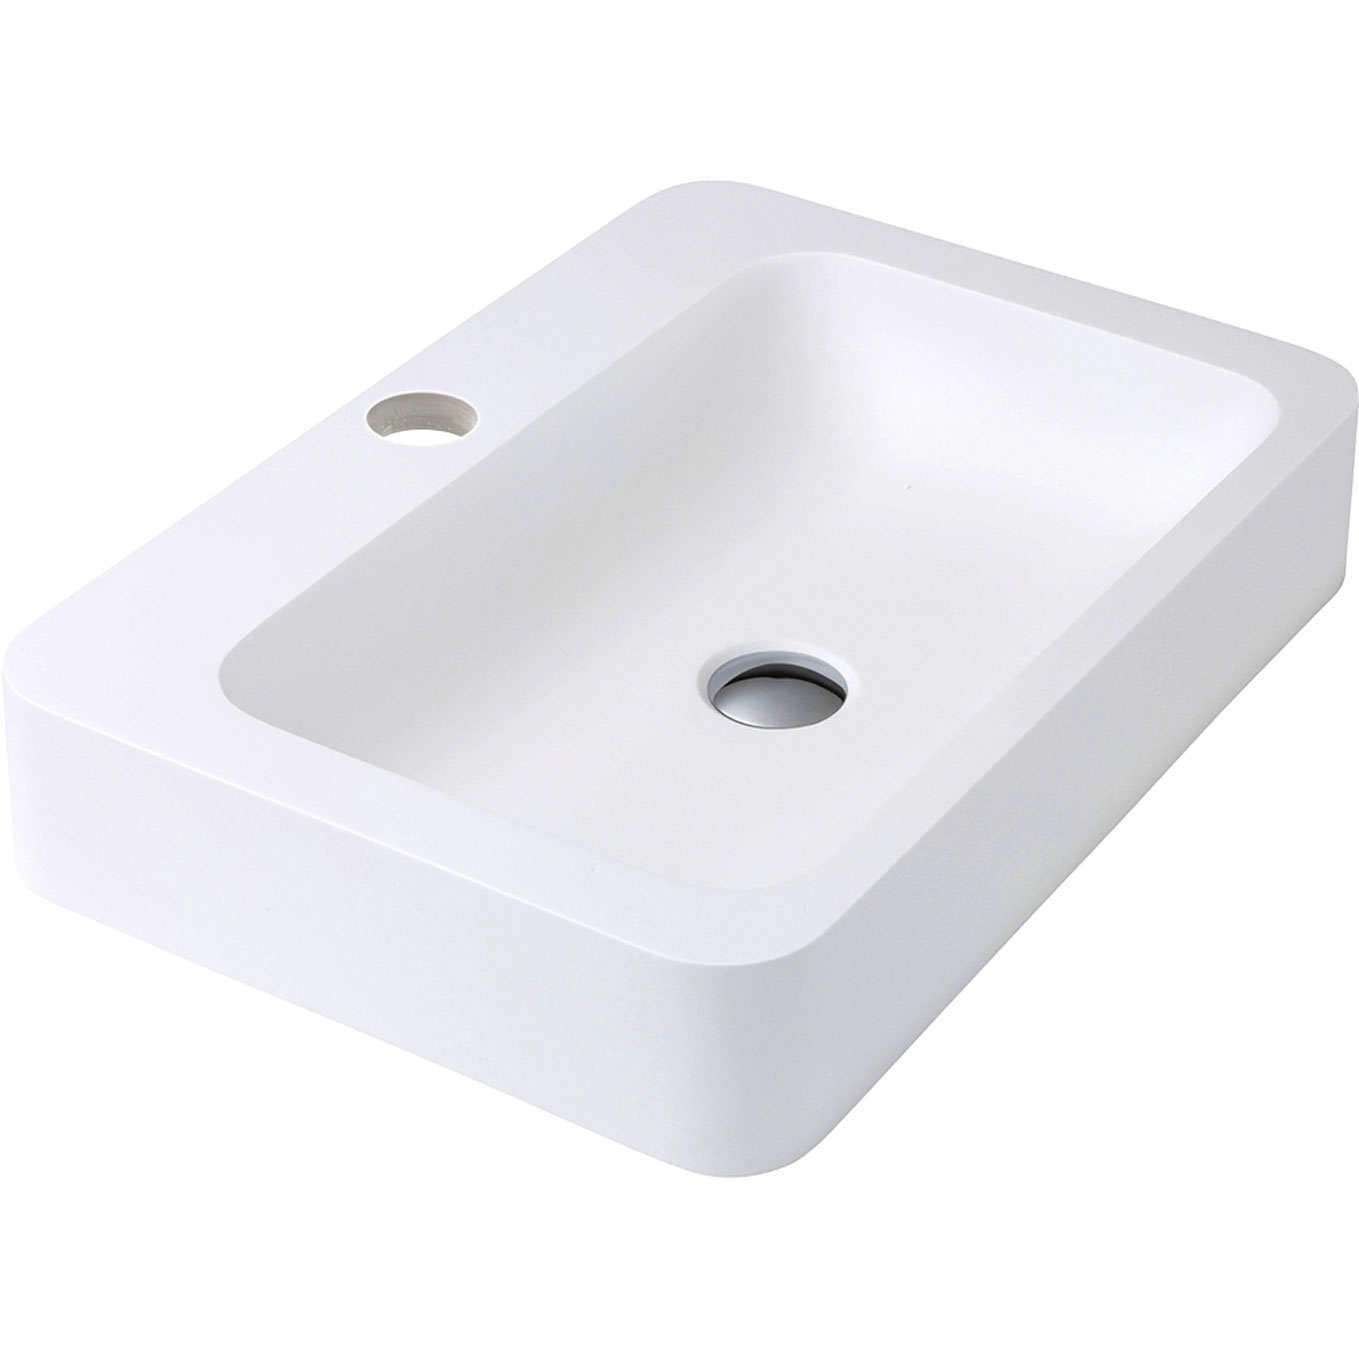 FIENZA CSB010 RONDO 600 SOLID SURFACE RECTANGULAR ABOVE COUNTER BASIN MATTE WHITE